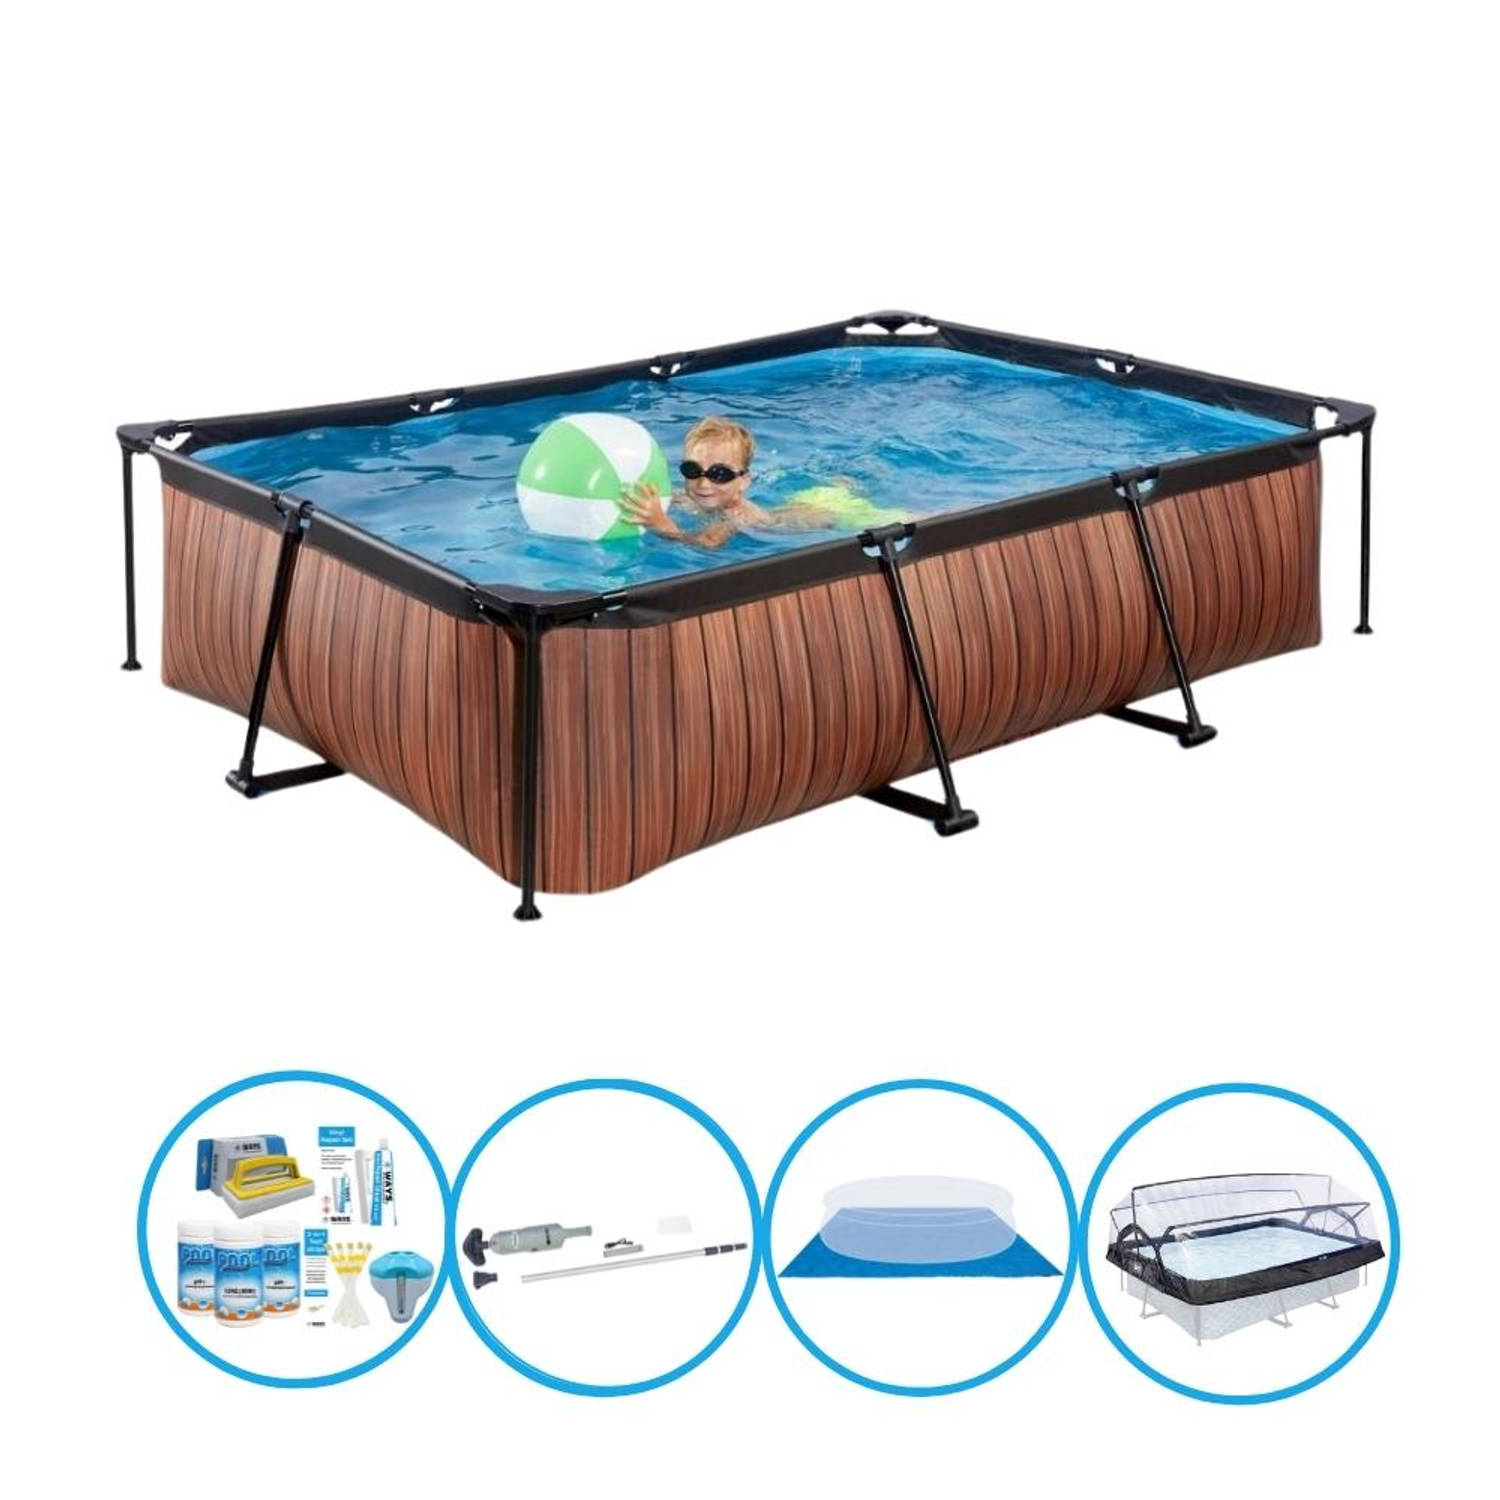 EXIT Toys Exit Zwembad Timber Style - 300x200x65 Cm - Frame Pool - Complete Zwembadset - Bruin